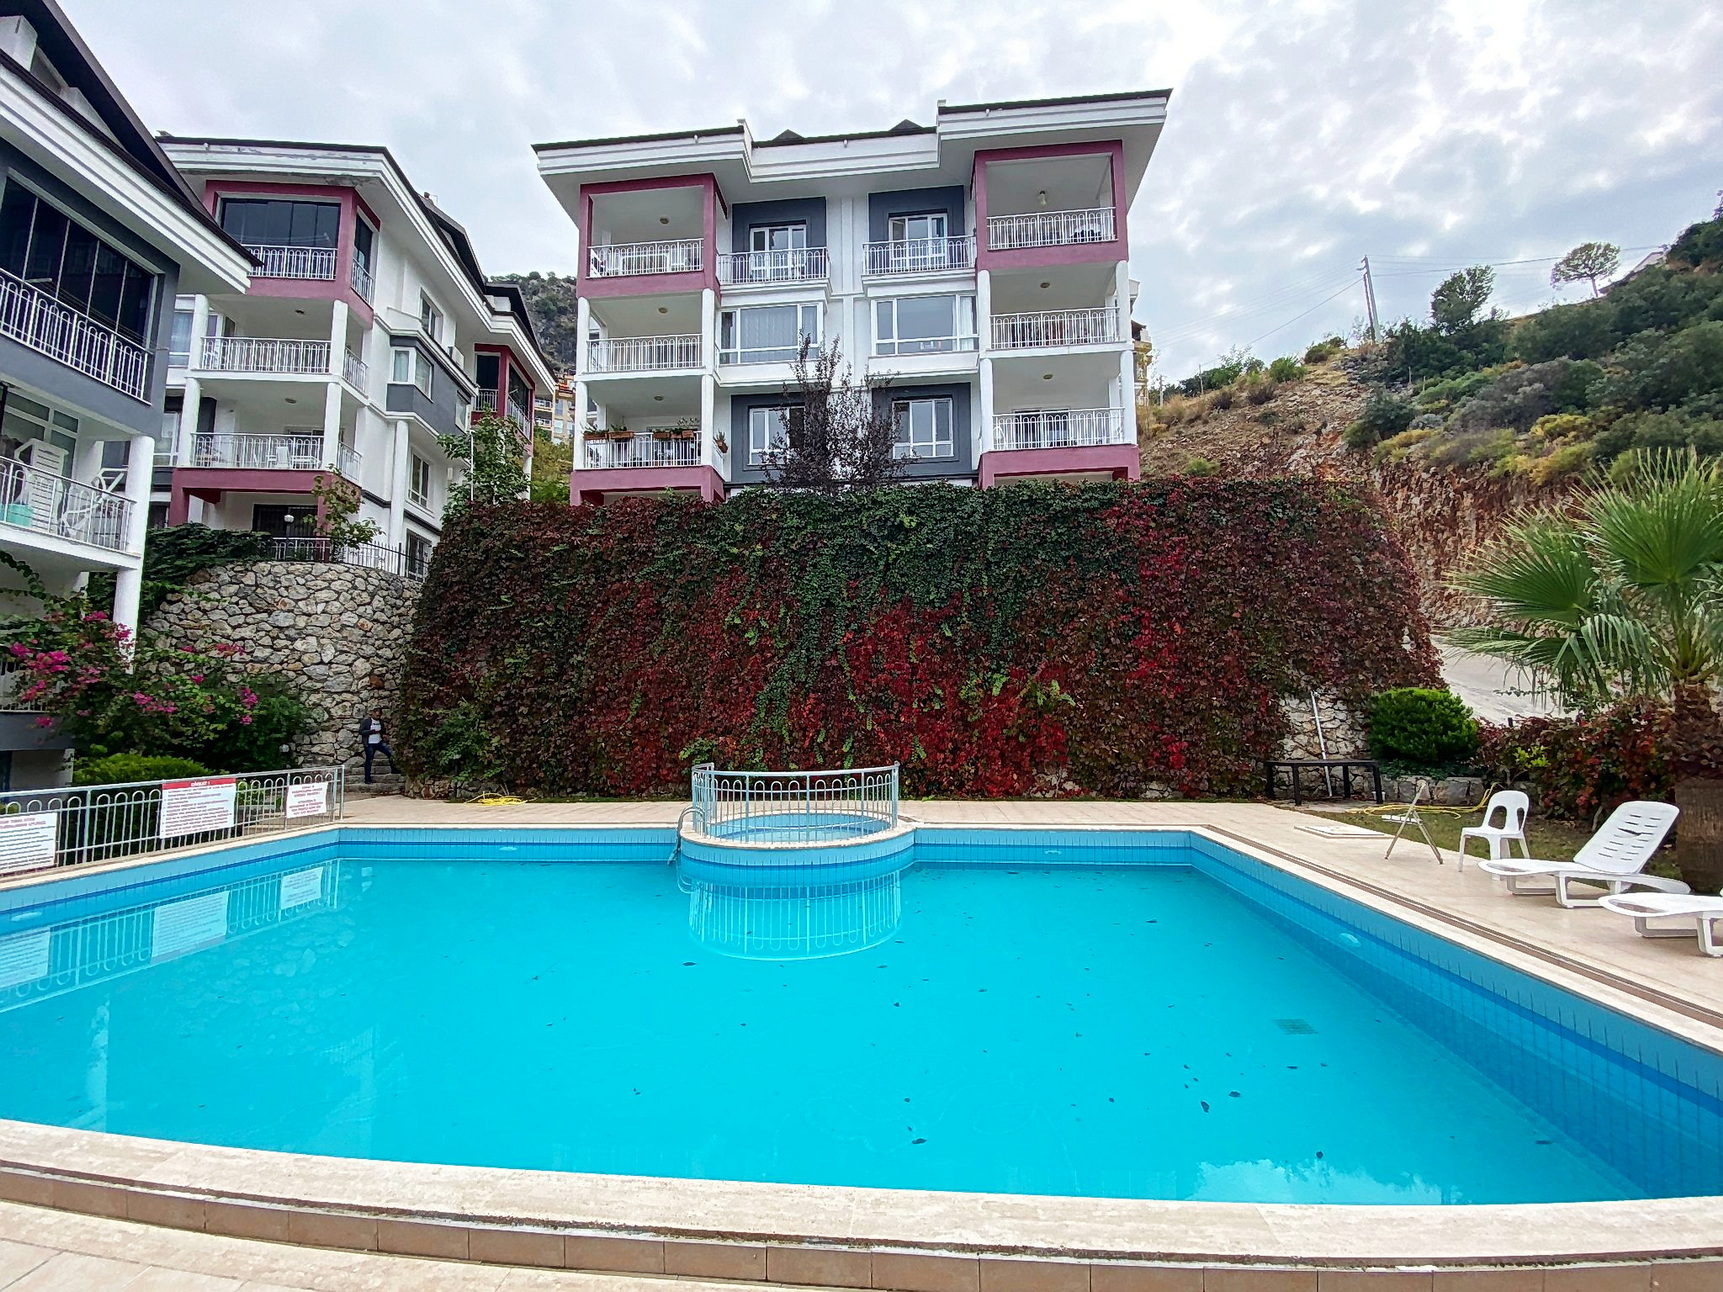 Spacious 2 Bedroom Duplex Apartment in Fethiye Town